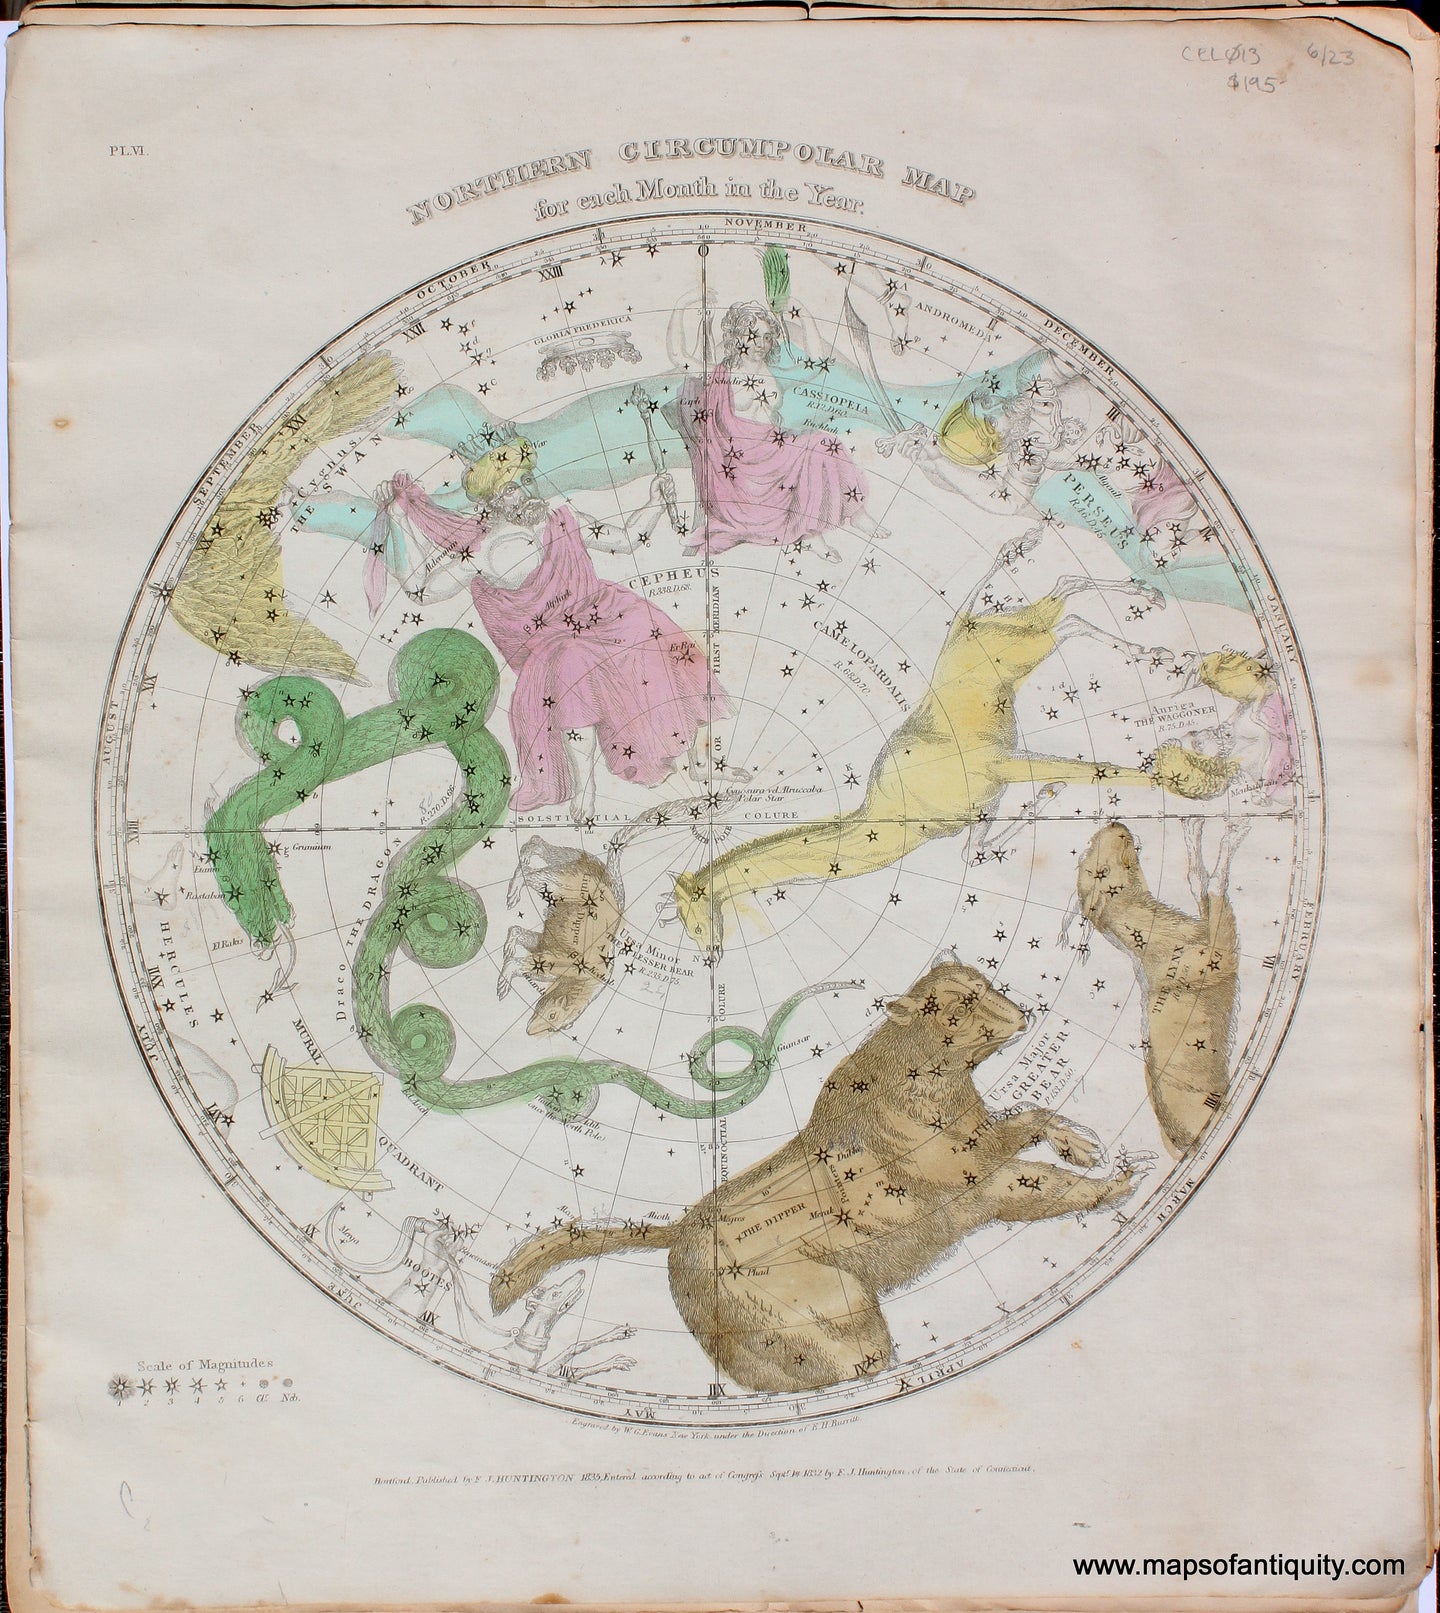 CEL013-Northern-Circumpolar-Map-for-each-Month-of-the-Year-constellation-star-chart-Ursa-Major-Cassiopeia-Perseus-Cepheus-Draco-1835-Burritt-1830s-1800s-19th-century-Maps-of-Antiquity